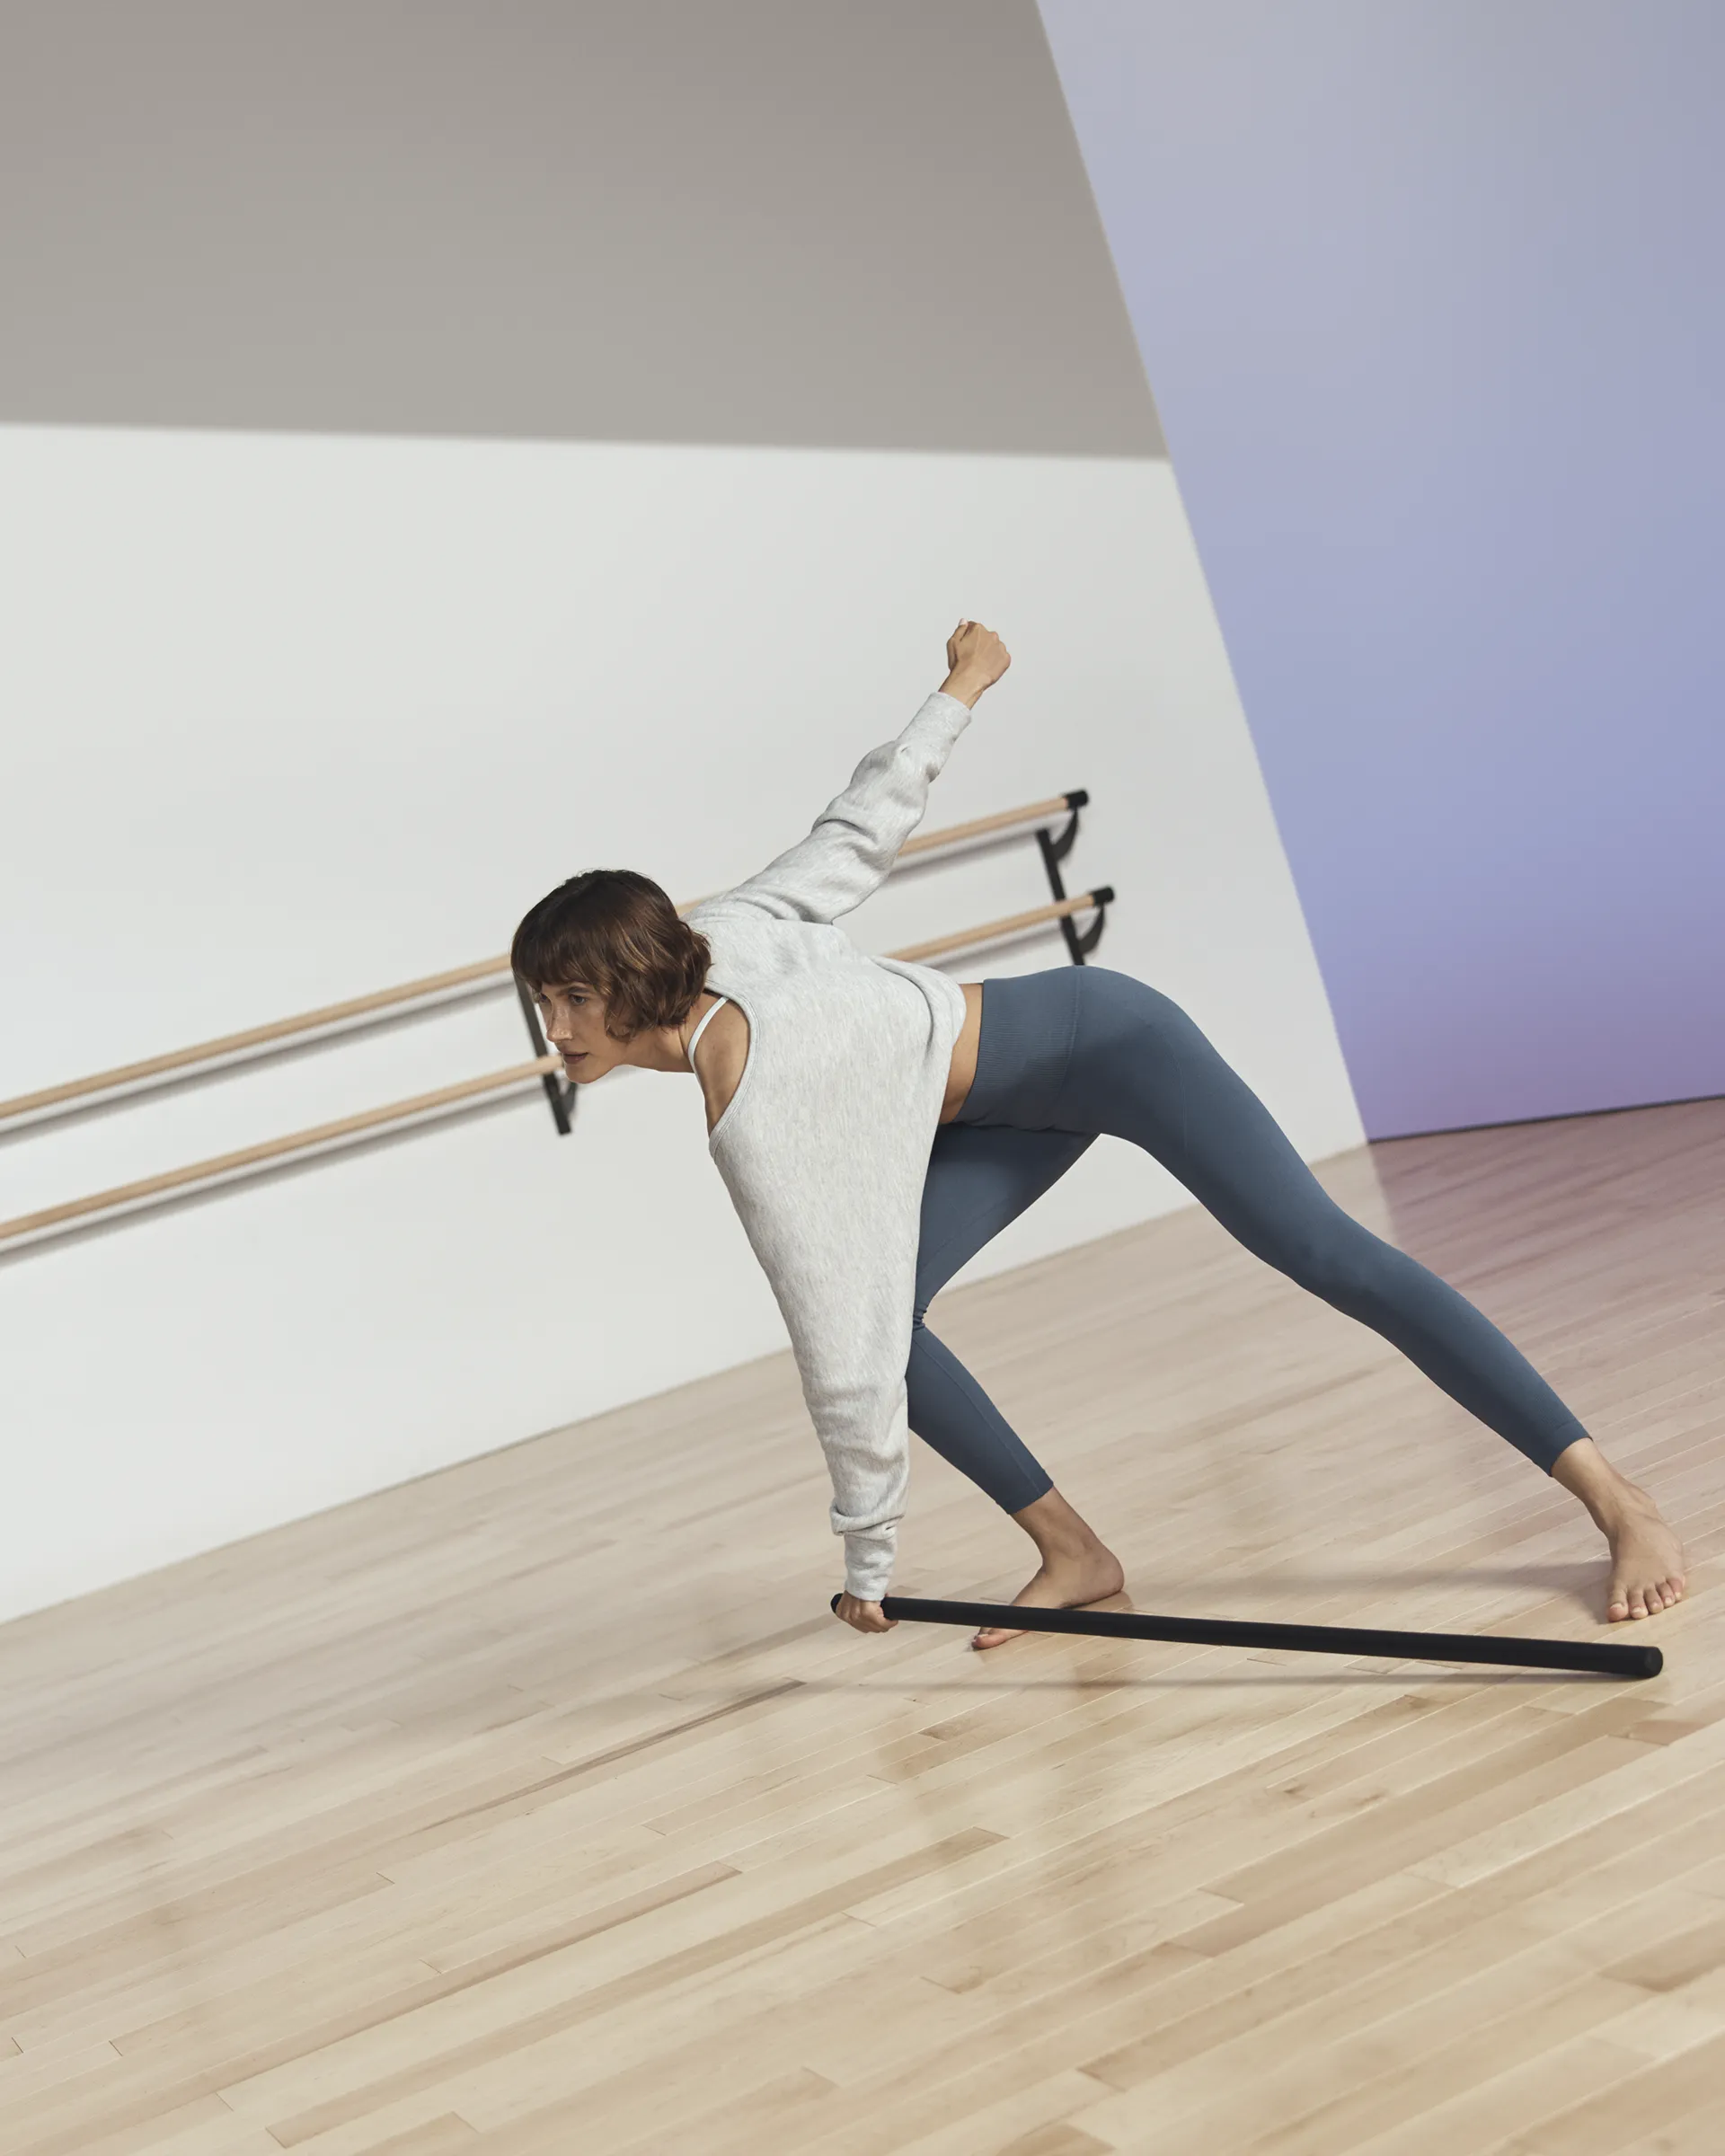 Life barre participant in forward bend position with body bar